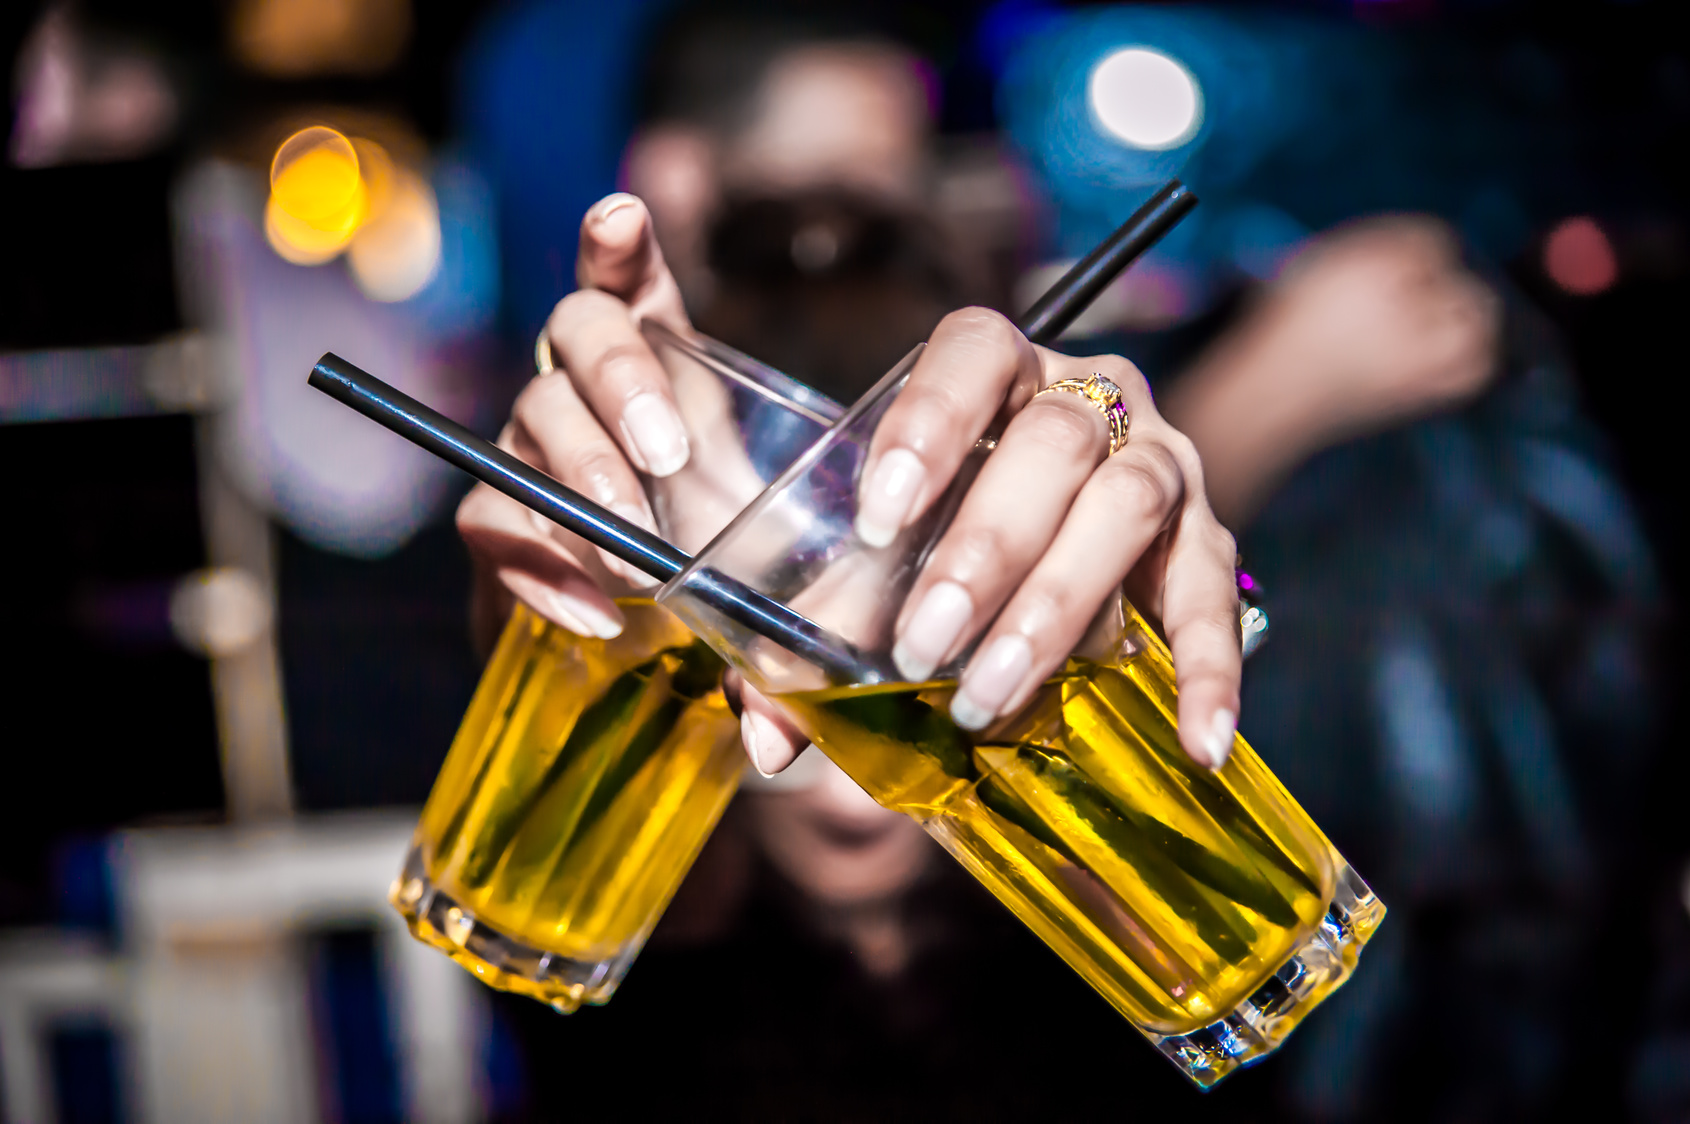 Partiers drink beer out of a straw, for some reason.